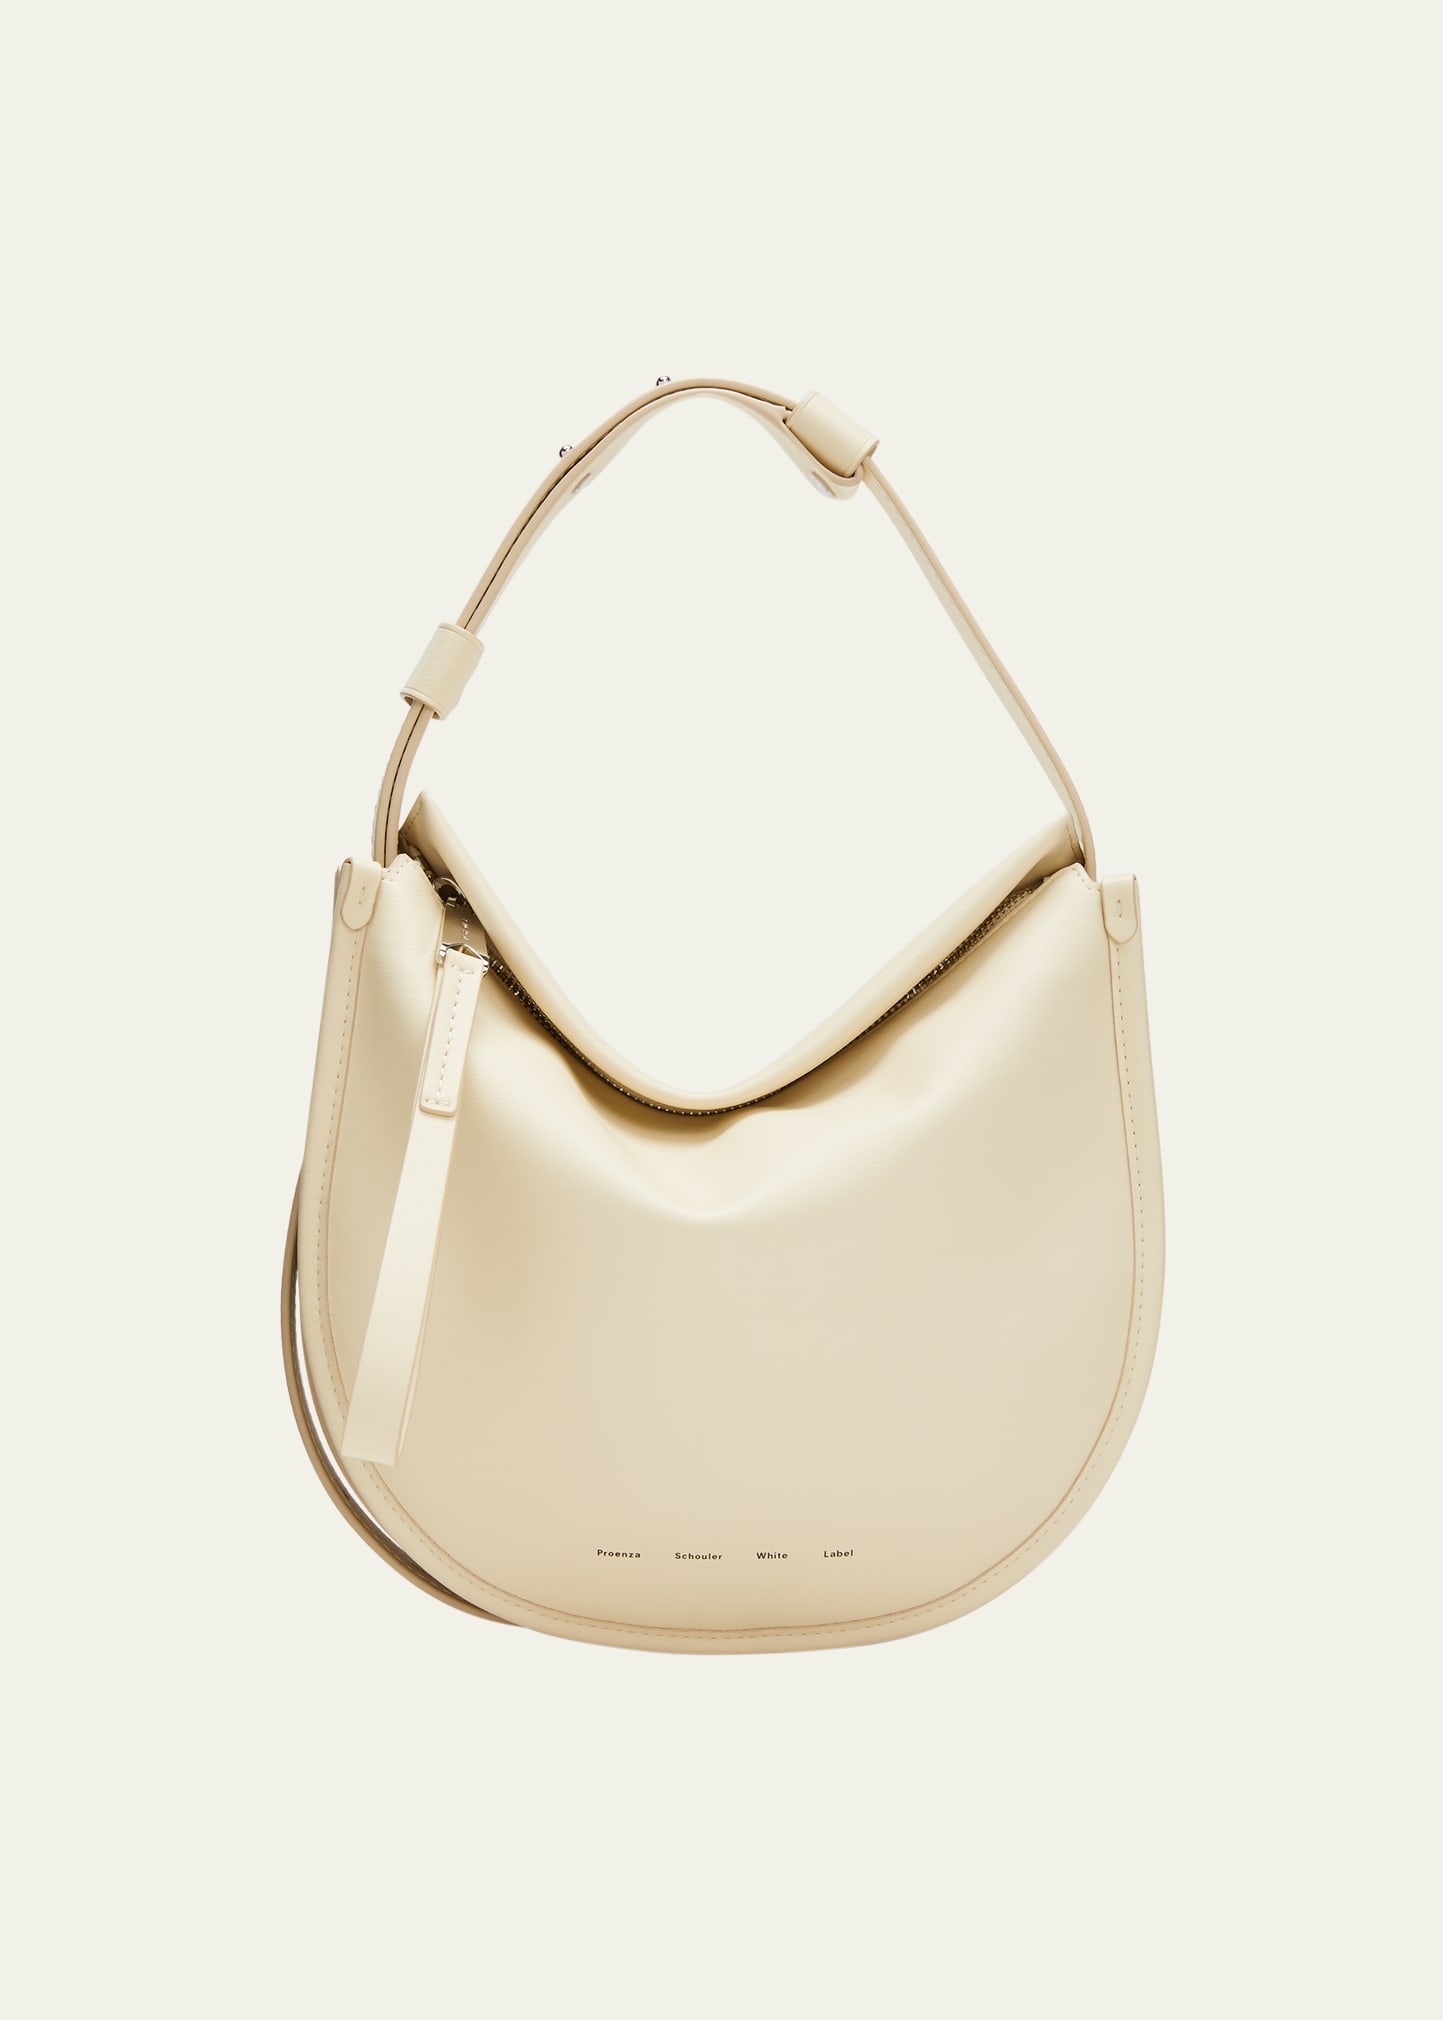 Proenza Schouler White Label Baxter Small Leather Hobo Bag In 103 Ivory